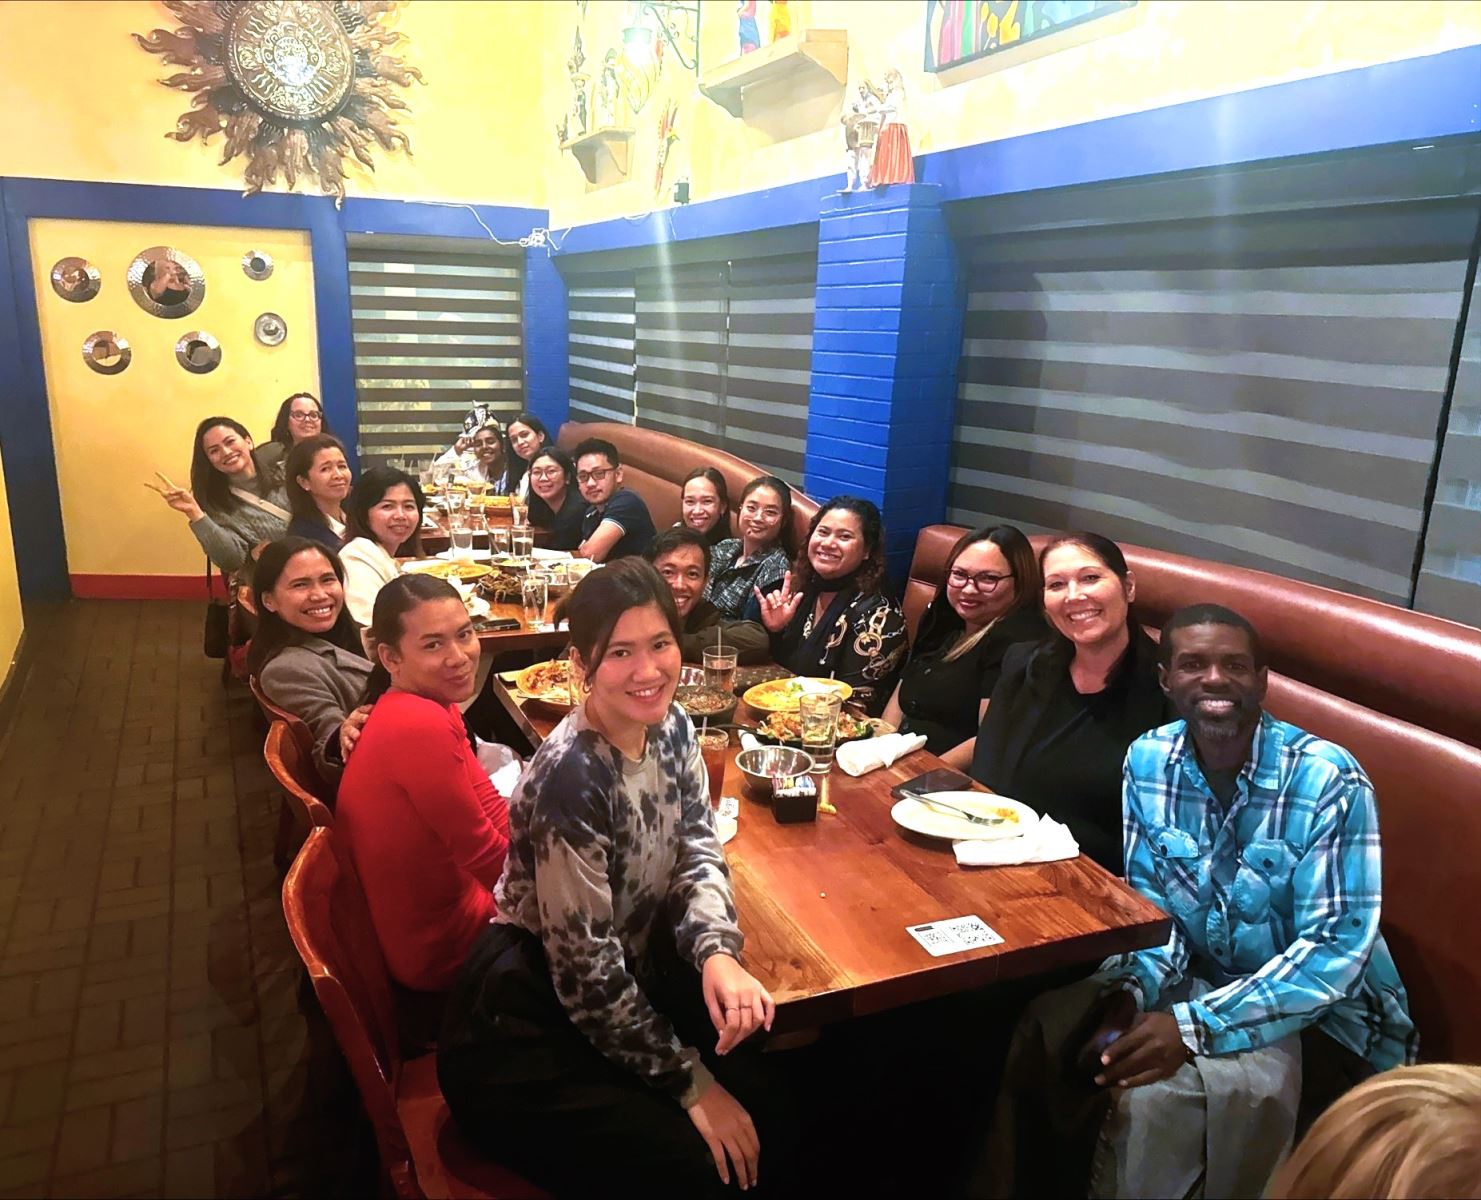 The new Exceptional Ed international teachers smile at a restaurant table.